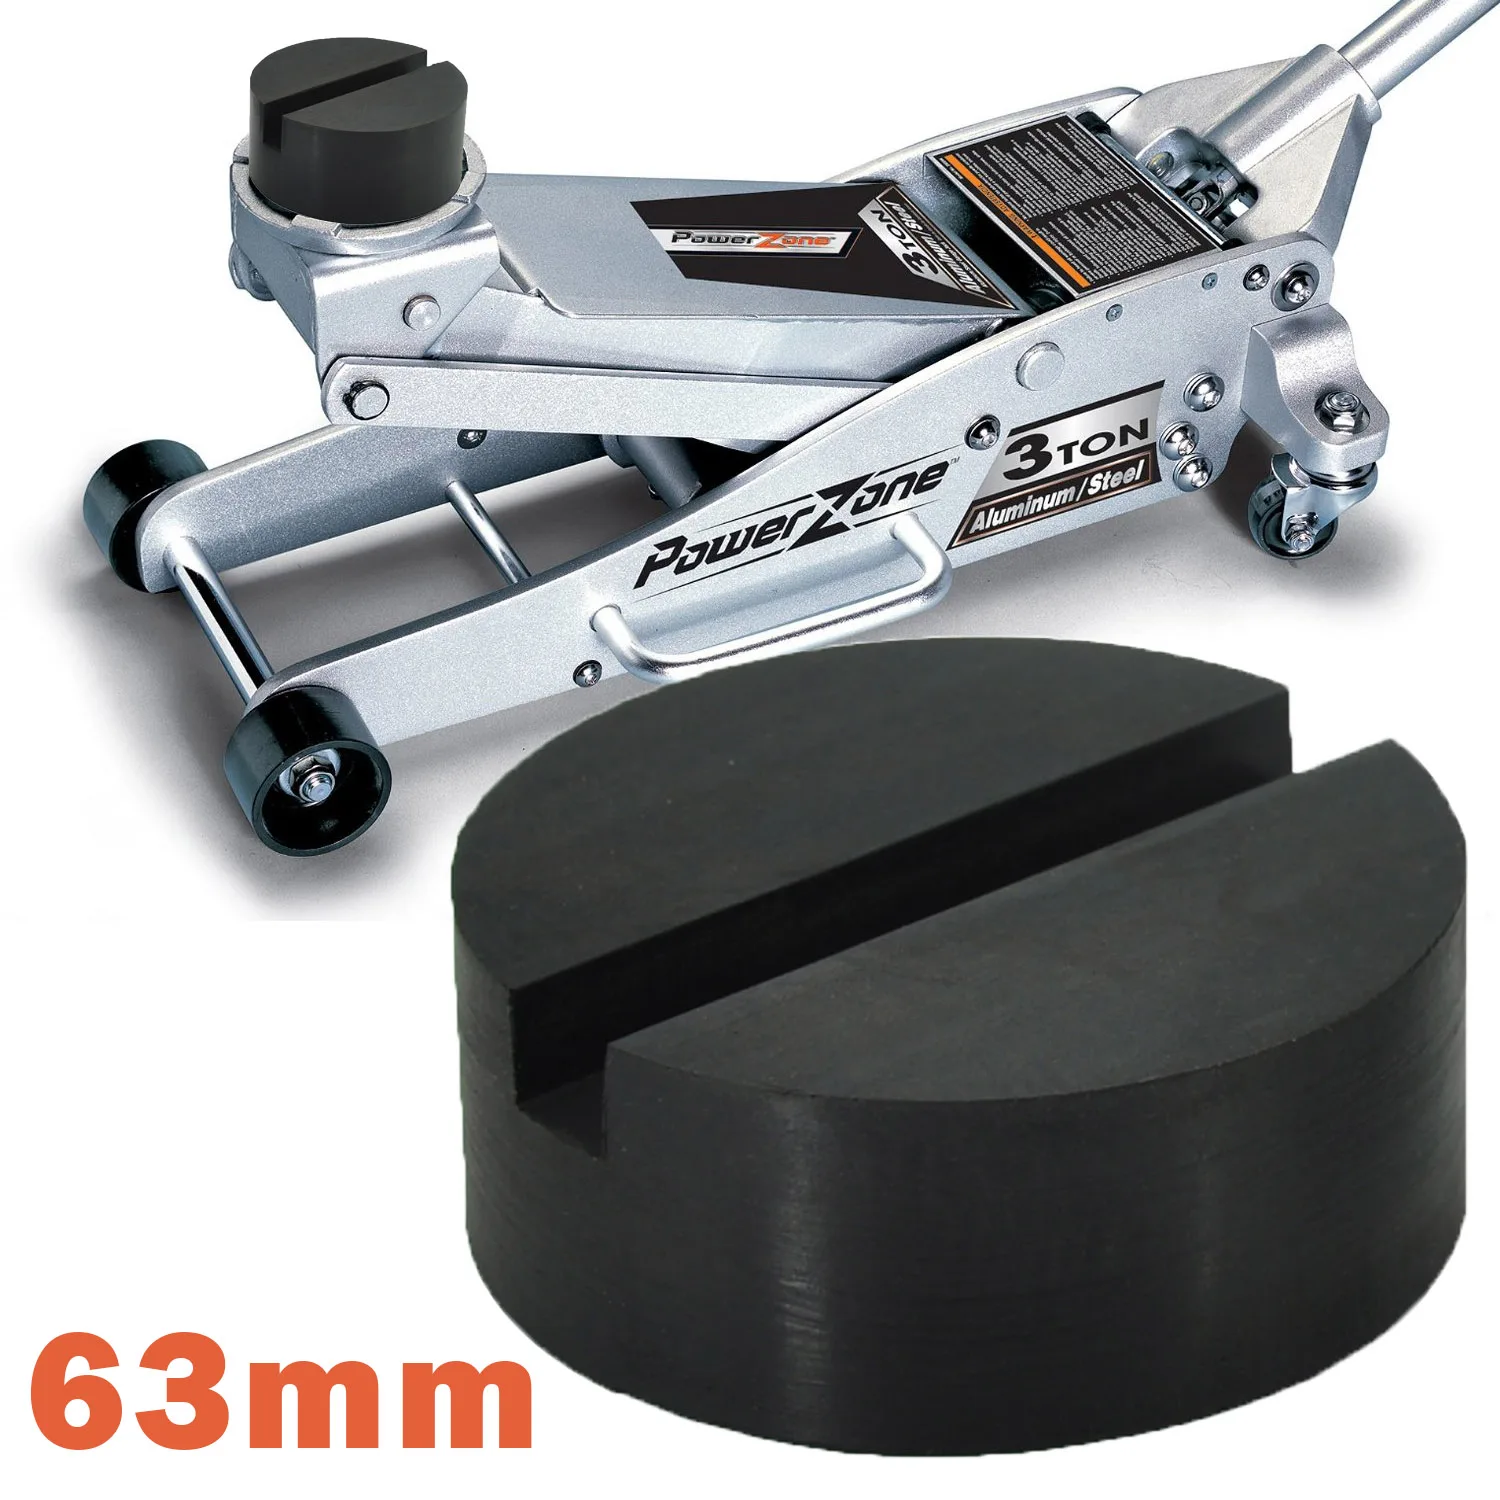 Car Slotted Pu Adapter Floor Jack Pads Jac Lift Stand Pinch Fe Rail Protector Pu - $126.51